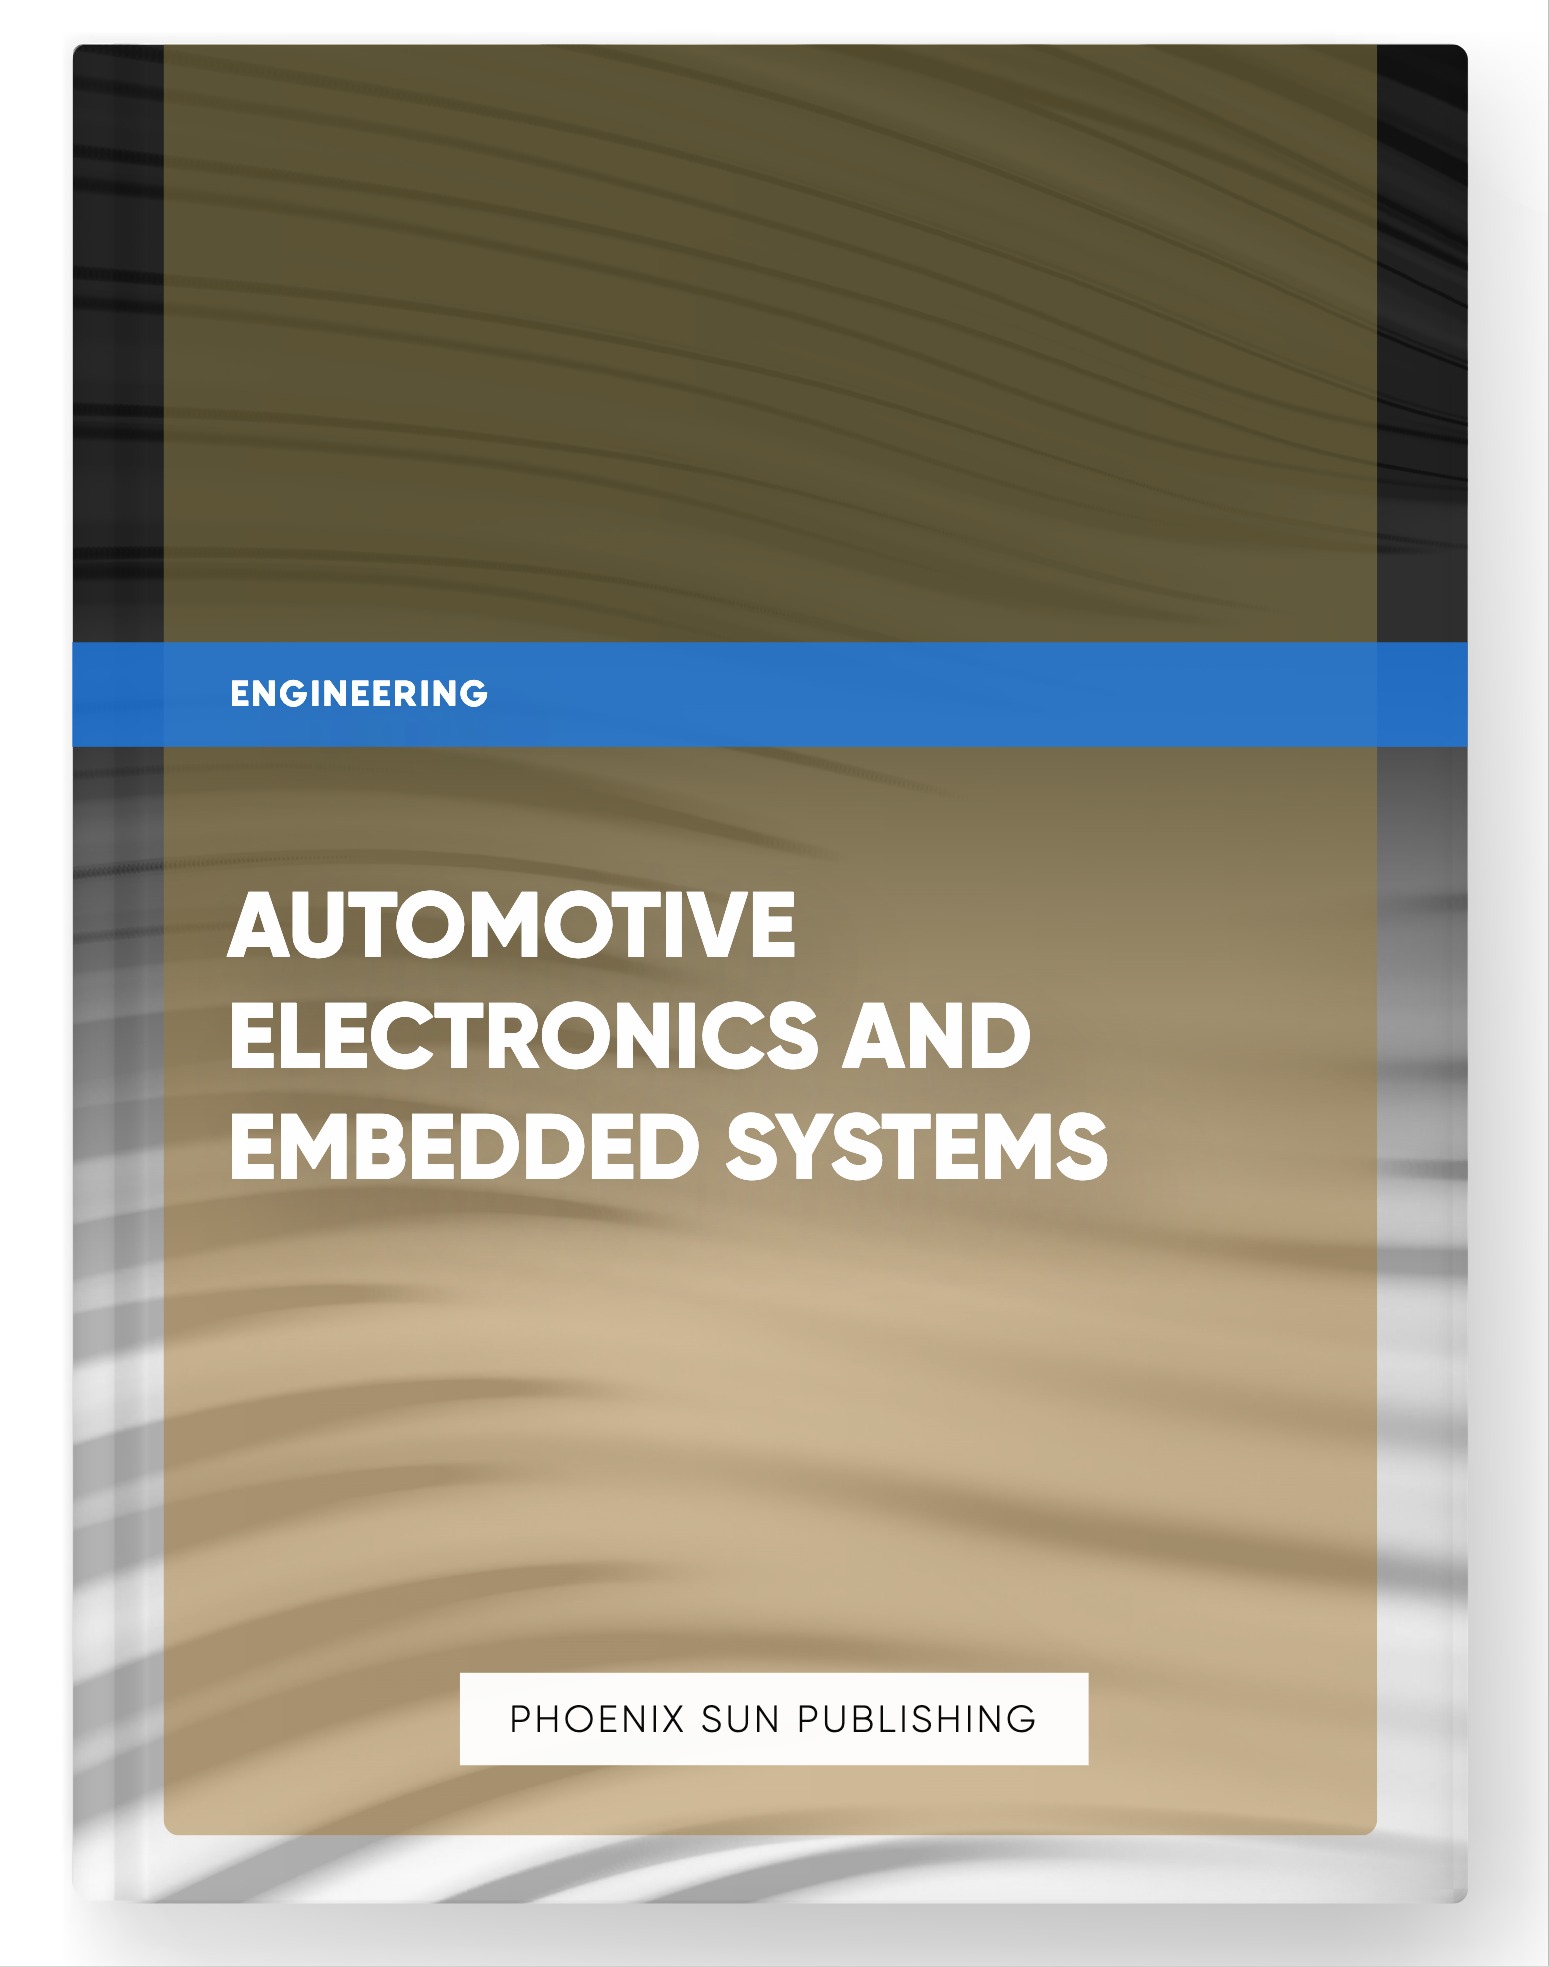 Automotive Electronics and Embedded Systems